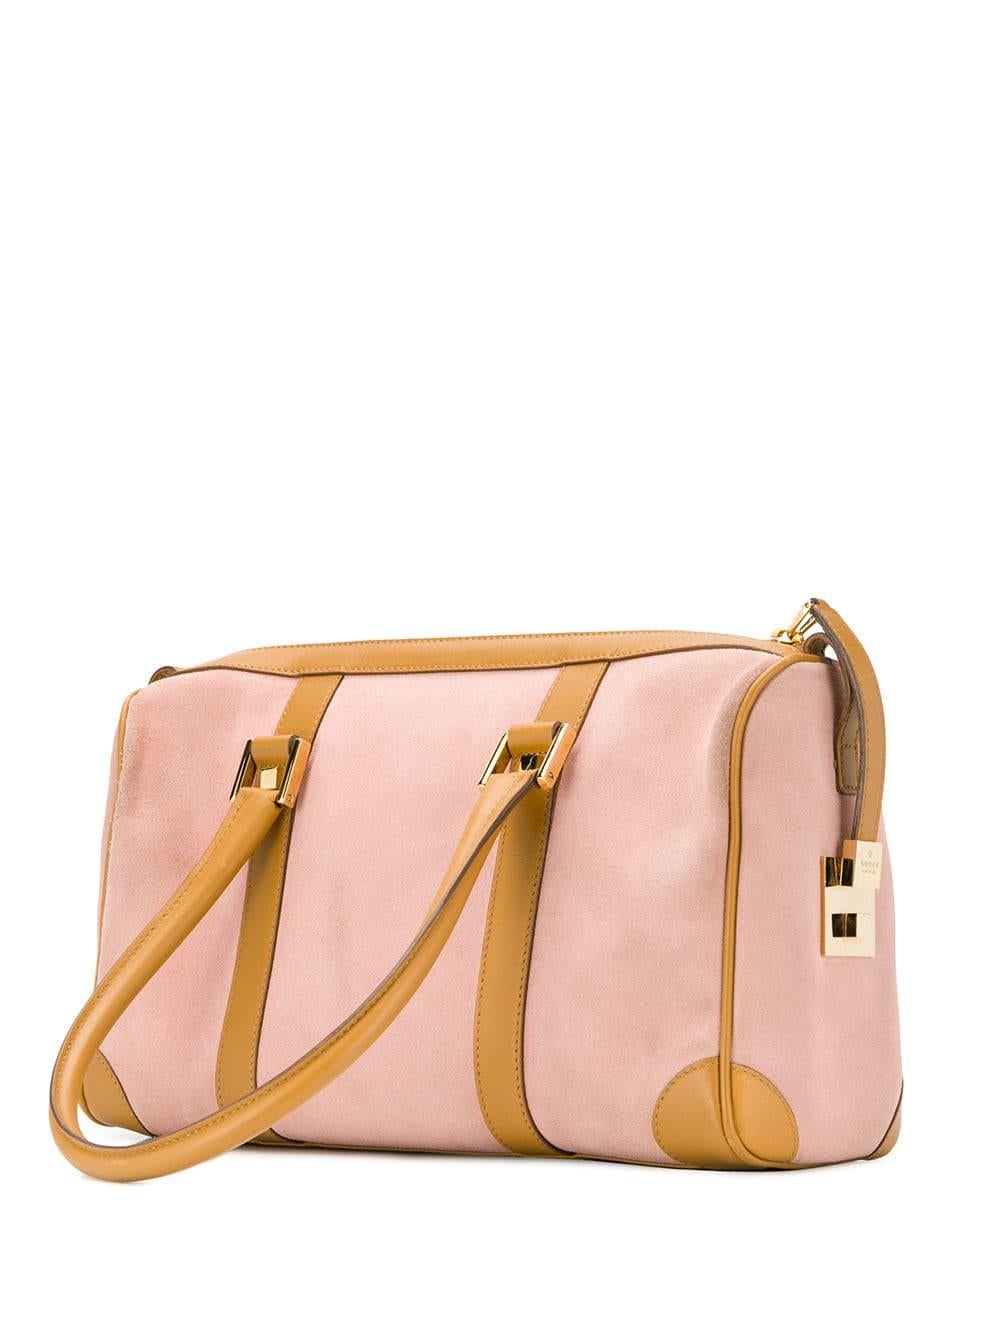 Gucci pink and brown leather and suede two-tone duffle bag featuring a front logo plaque, gold-tone hardware, a top zip fastening, top handles and a main internal compartment.
Width 11in (28cm)
Height 6.7in. (17cm)
Depth 3.9in (10cm)
In good vintage